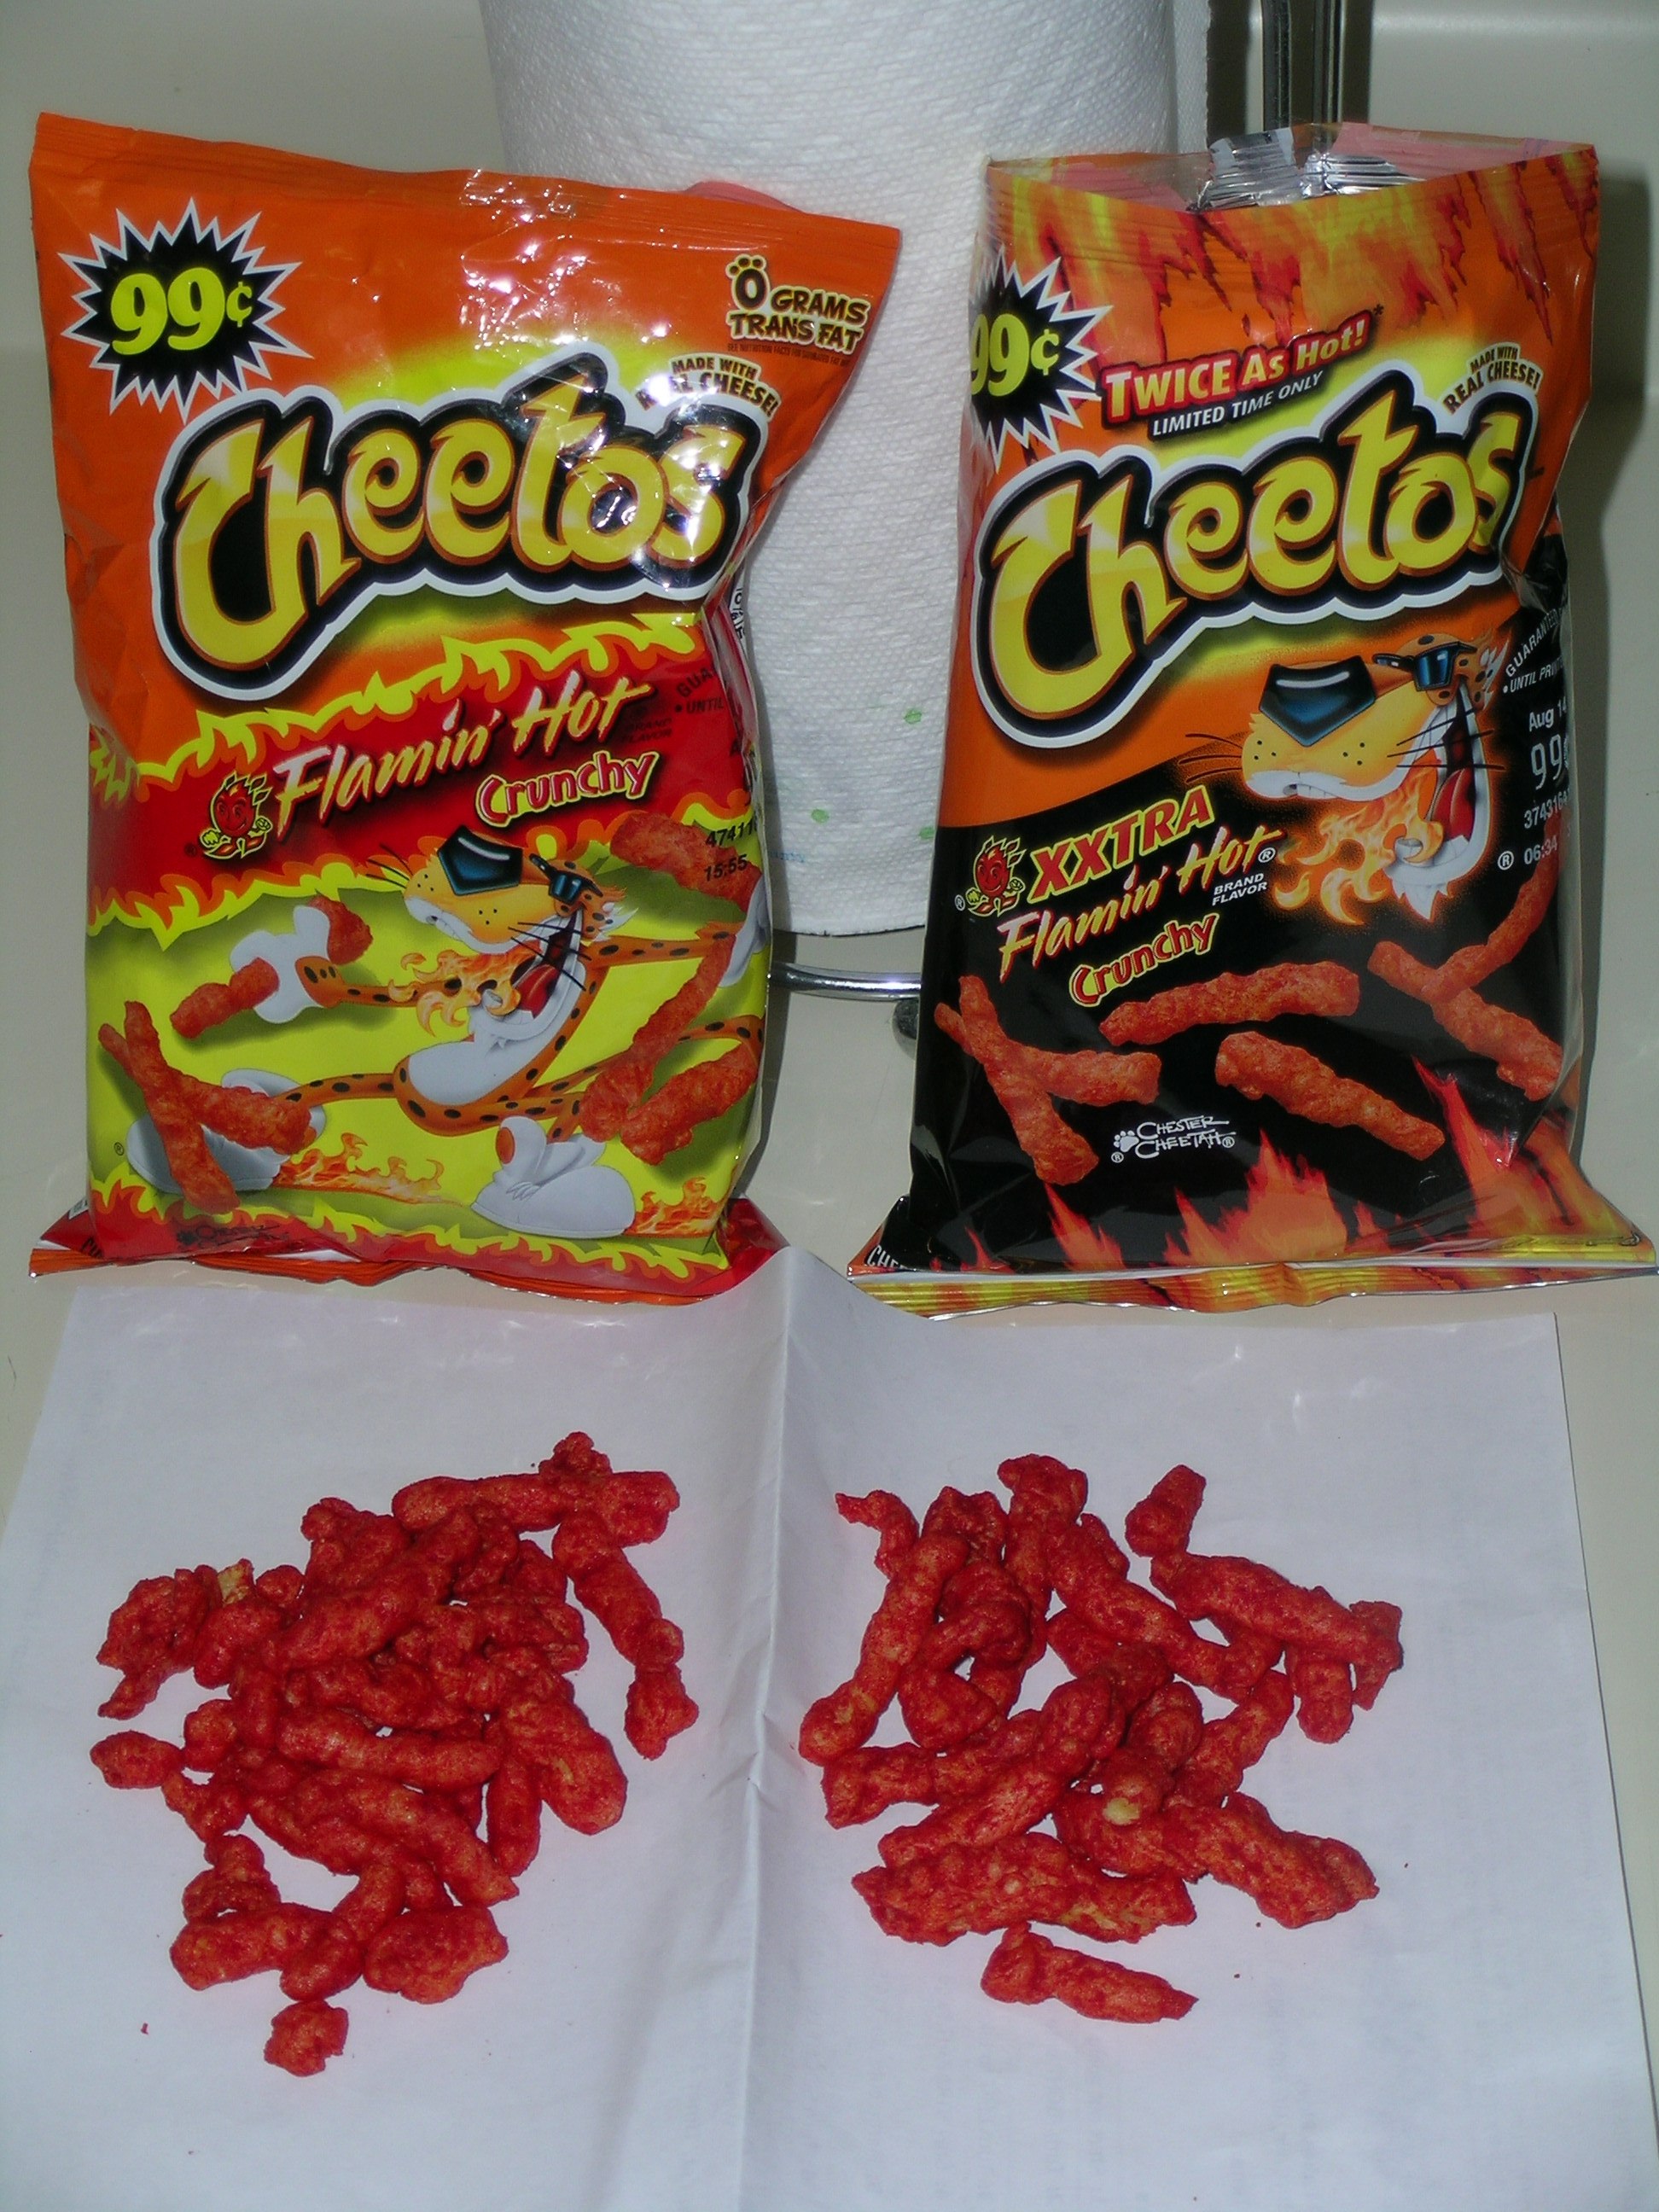 Name cheetos crunchy xxtra flamin' hot cheese flavored snacks you may ...